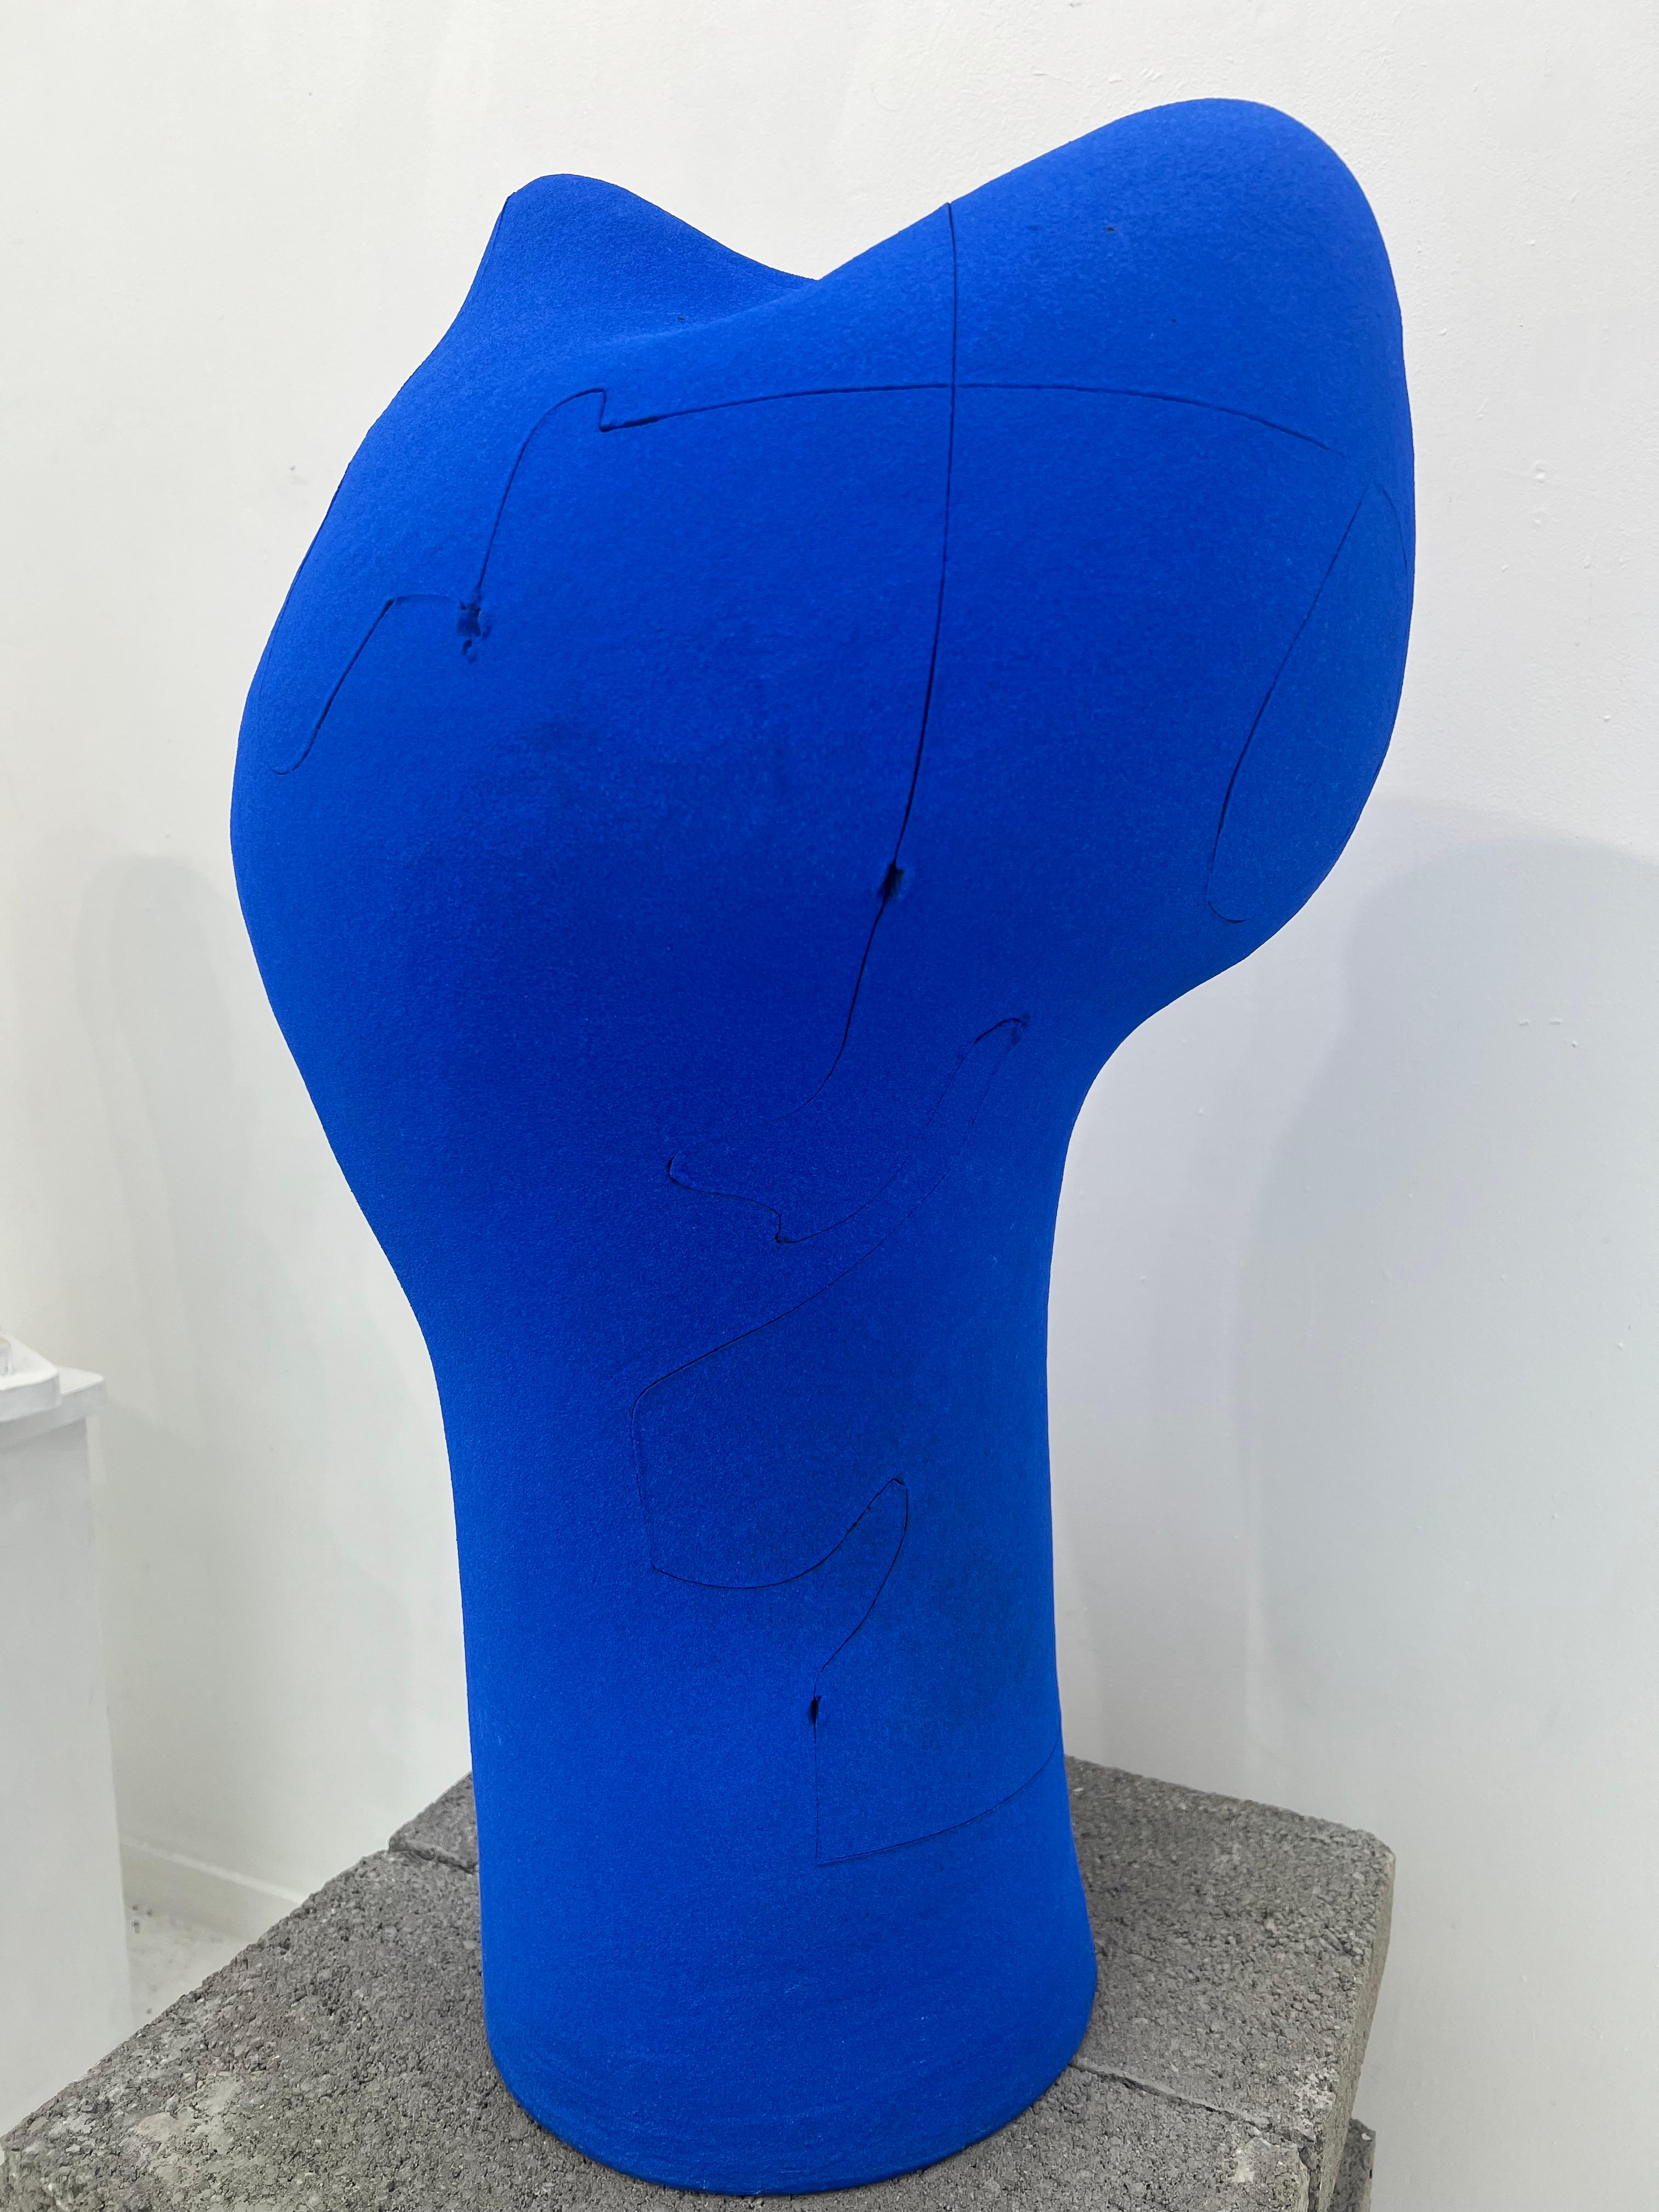 I Hate Blue - Sculpture by Jeff Gomez